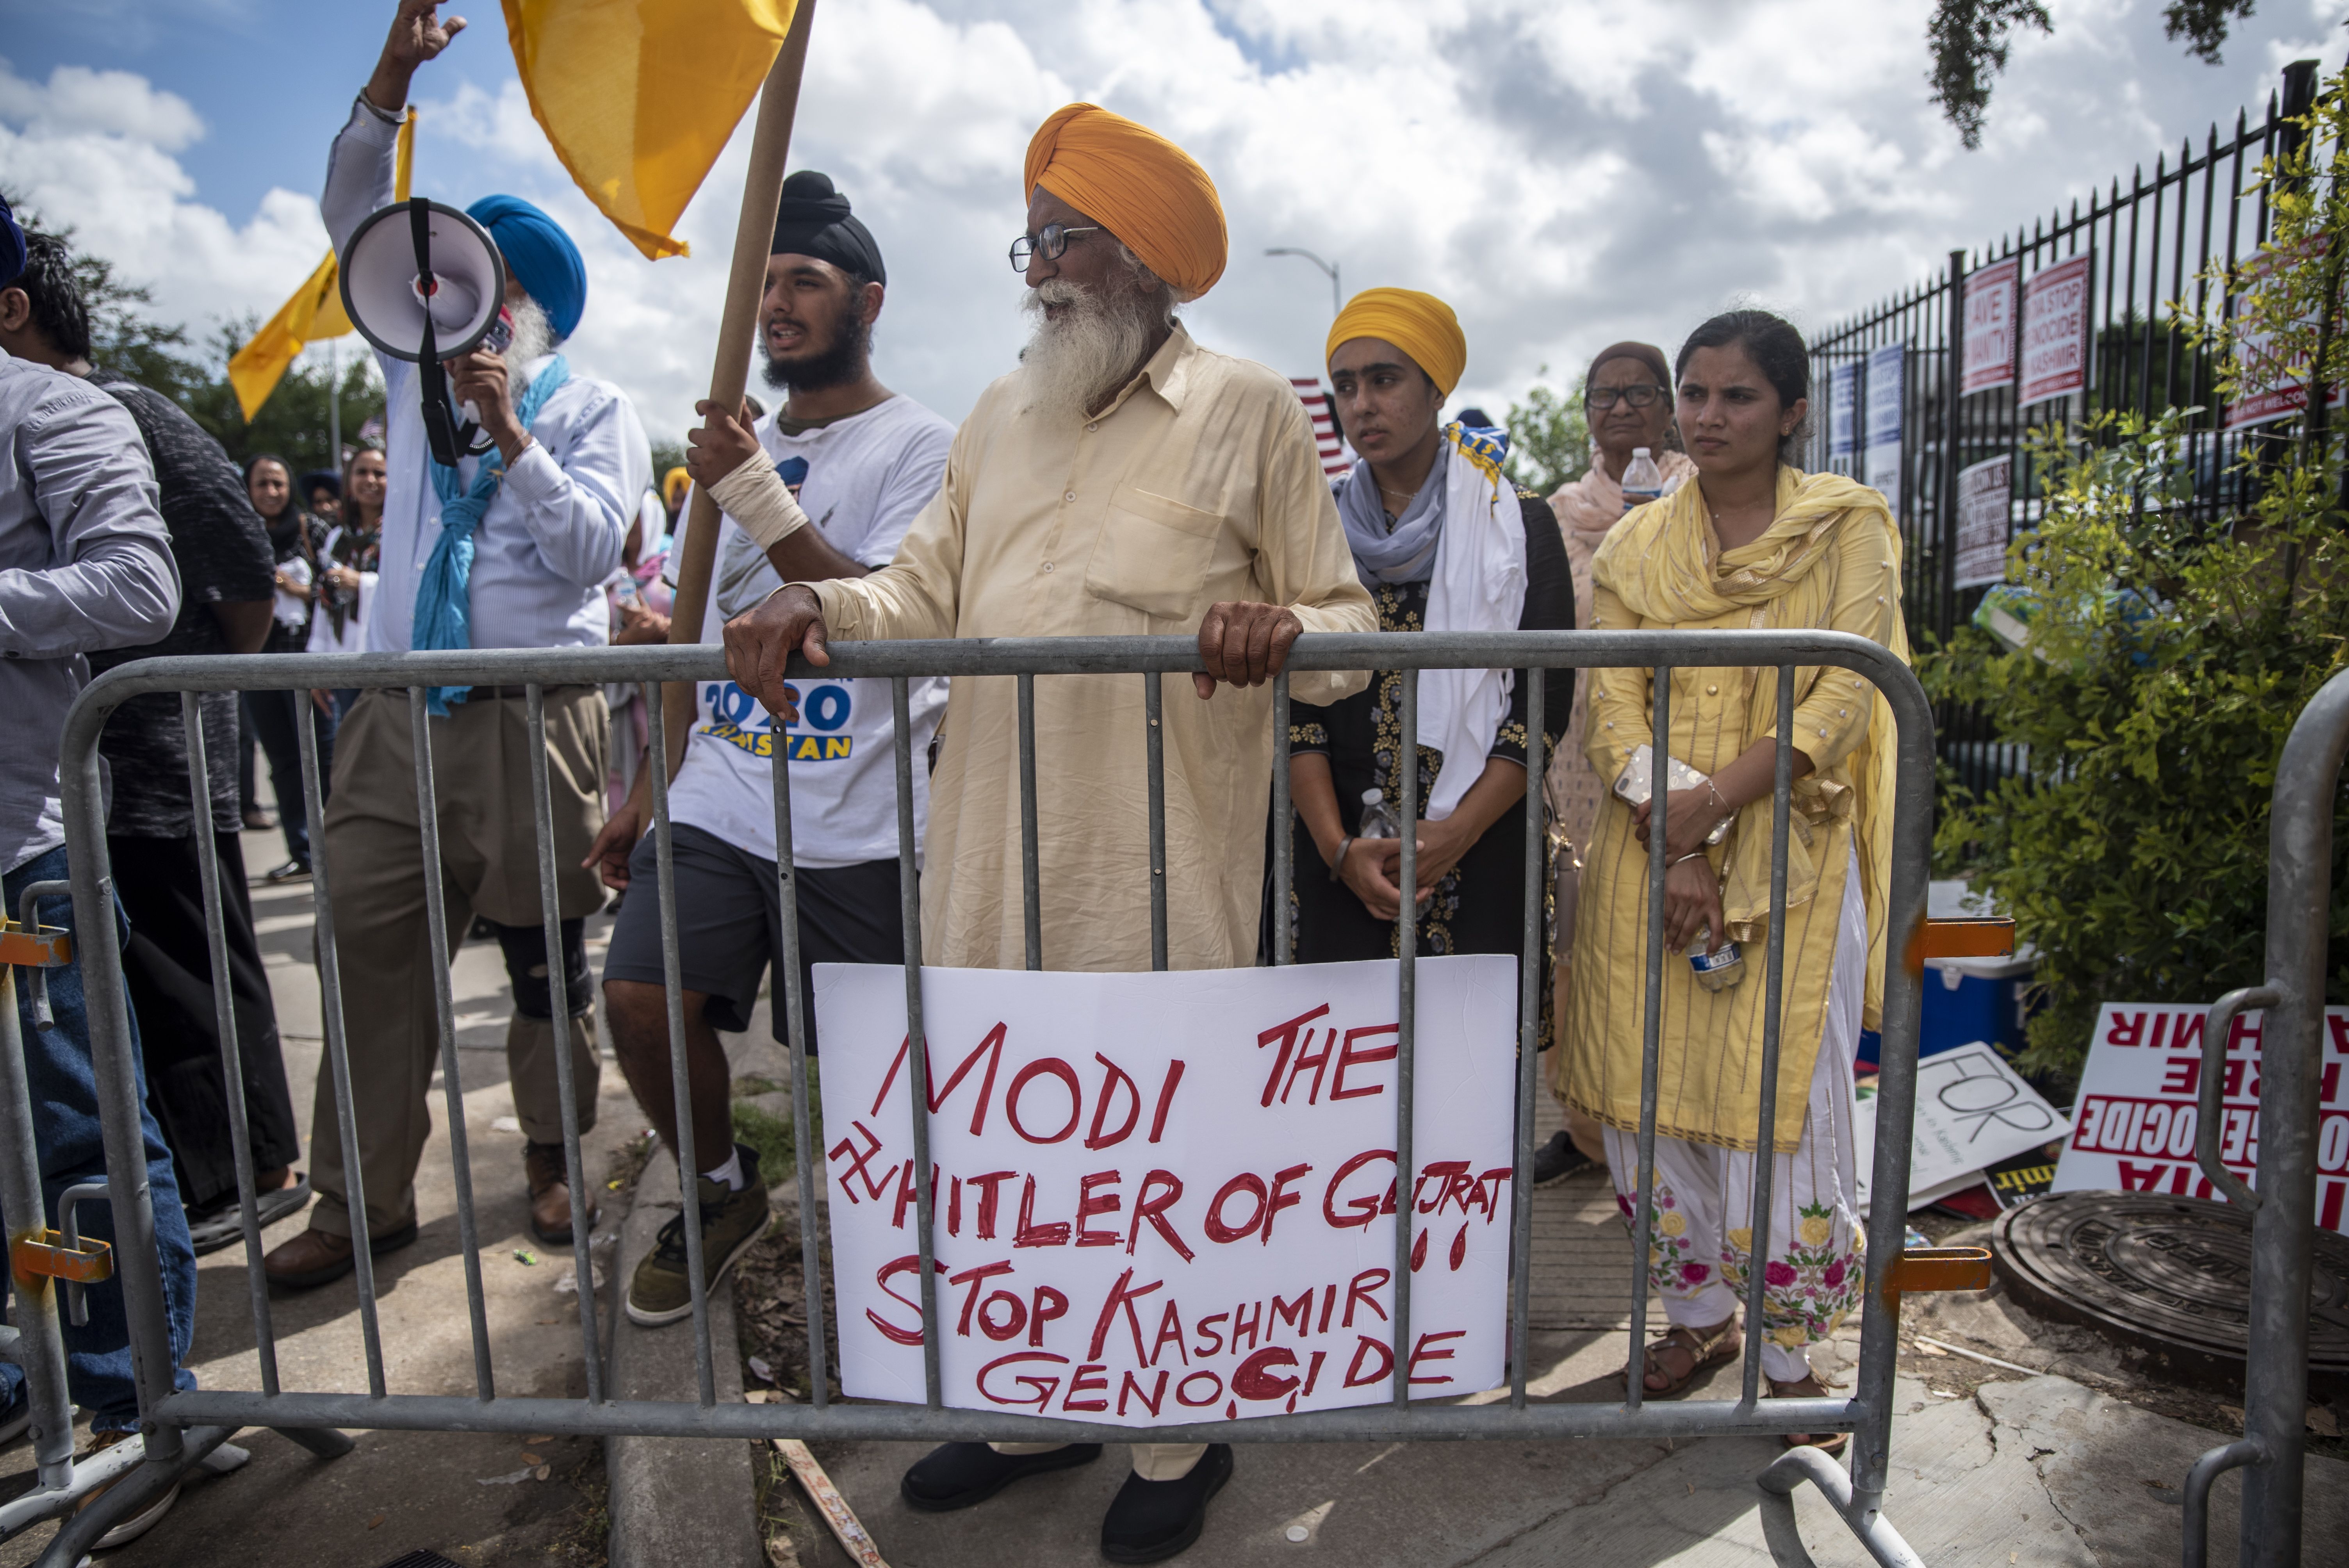 Protesters chant and wave flags outside after a rally attended by Indian Prime Minister Narendra Modi at NRG Stadium on September 22, 2019 in Houston, Texas.